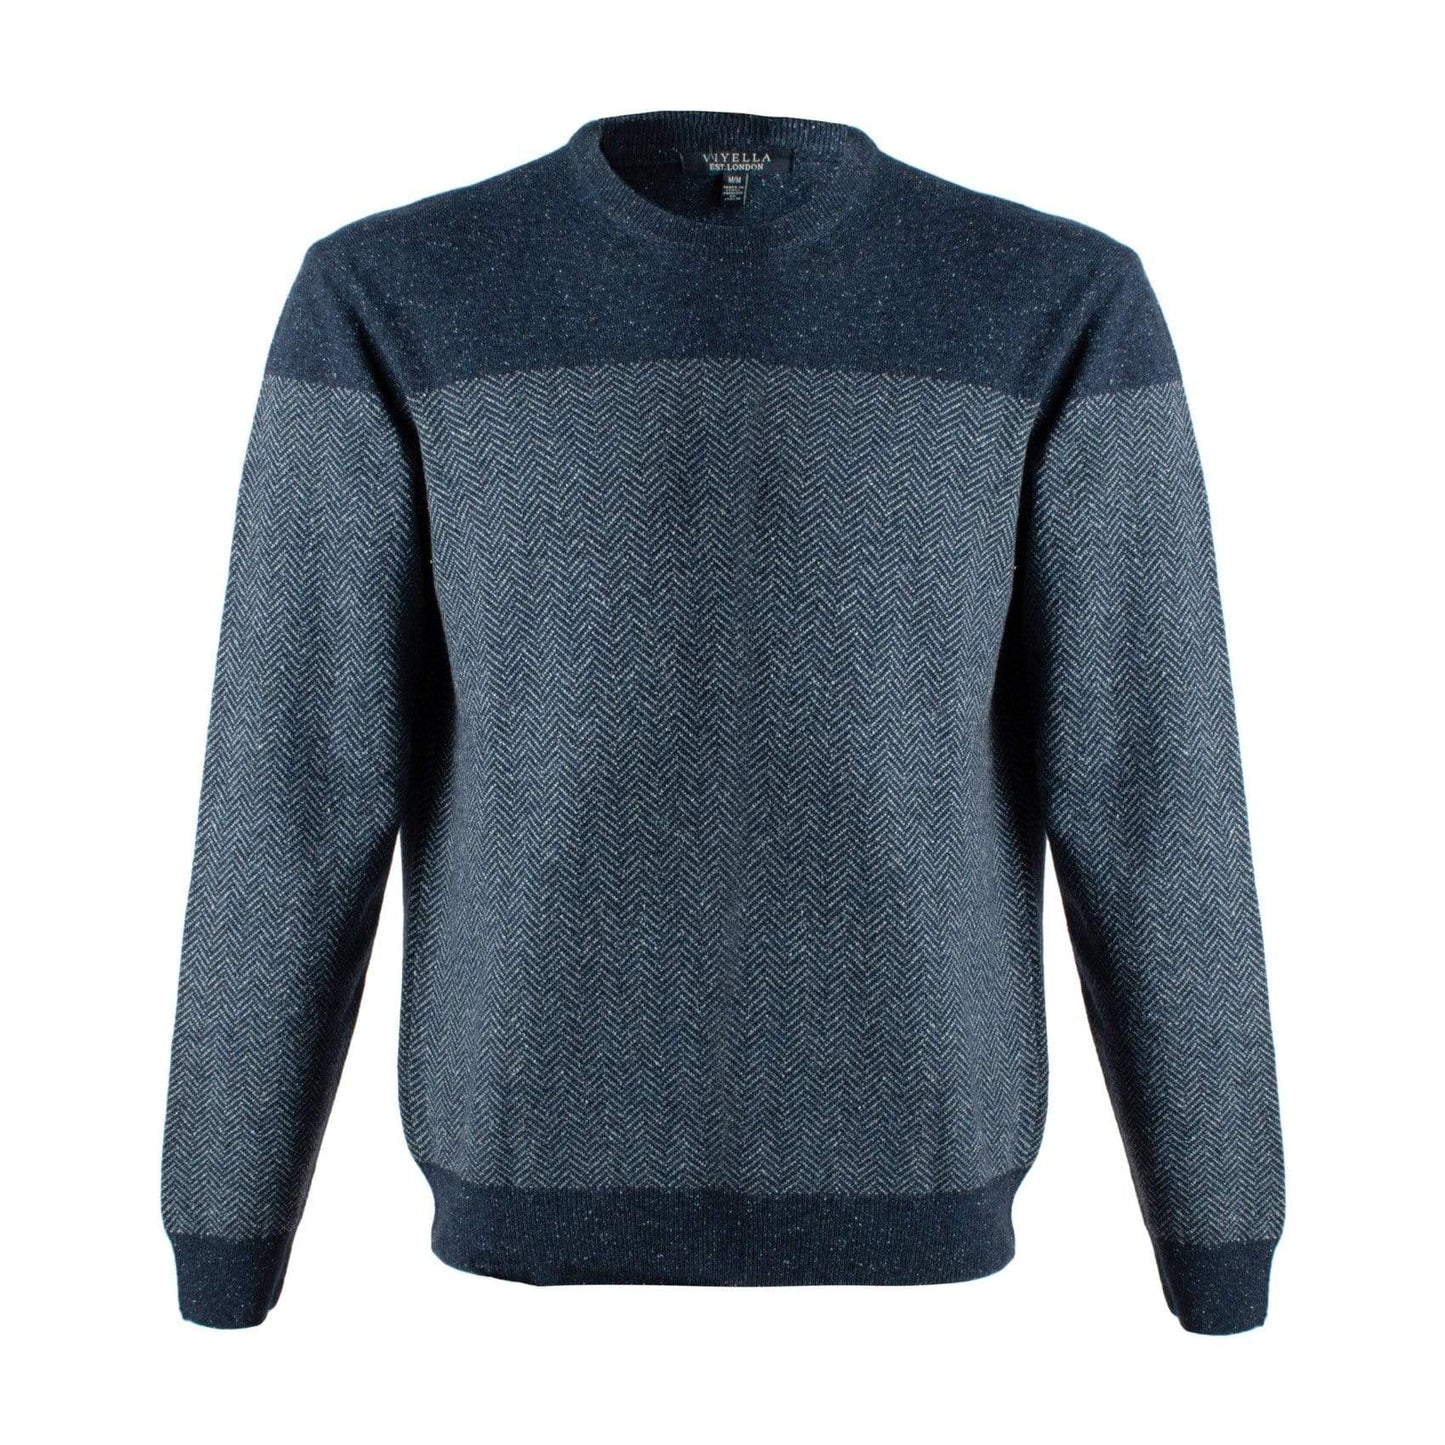 Viyella Discover Classic Style of these Blue 100% Cotton Tonal Herringbone Crewneck: Crafted with Excellence in Italy